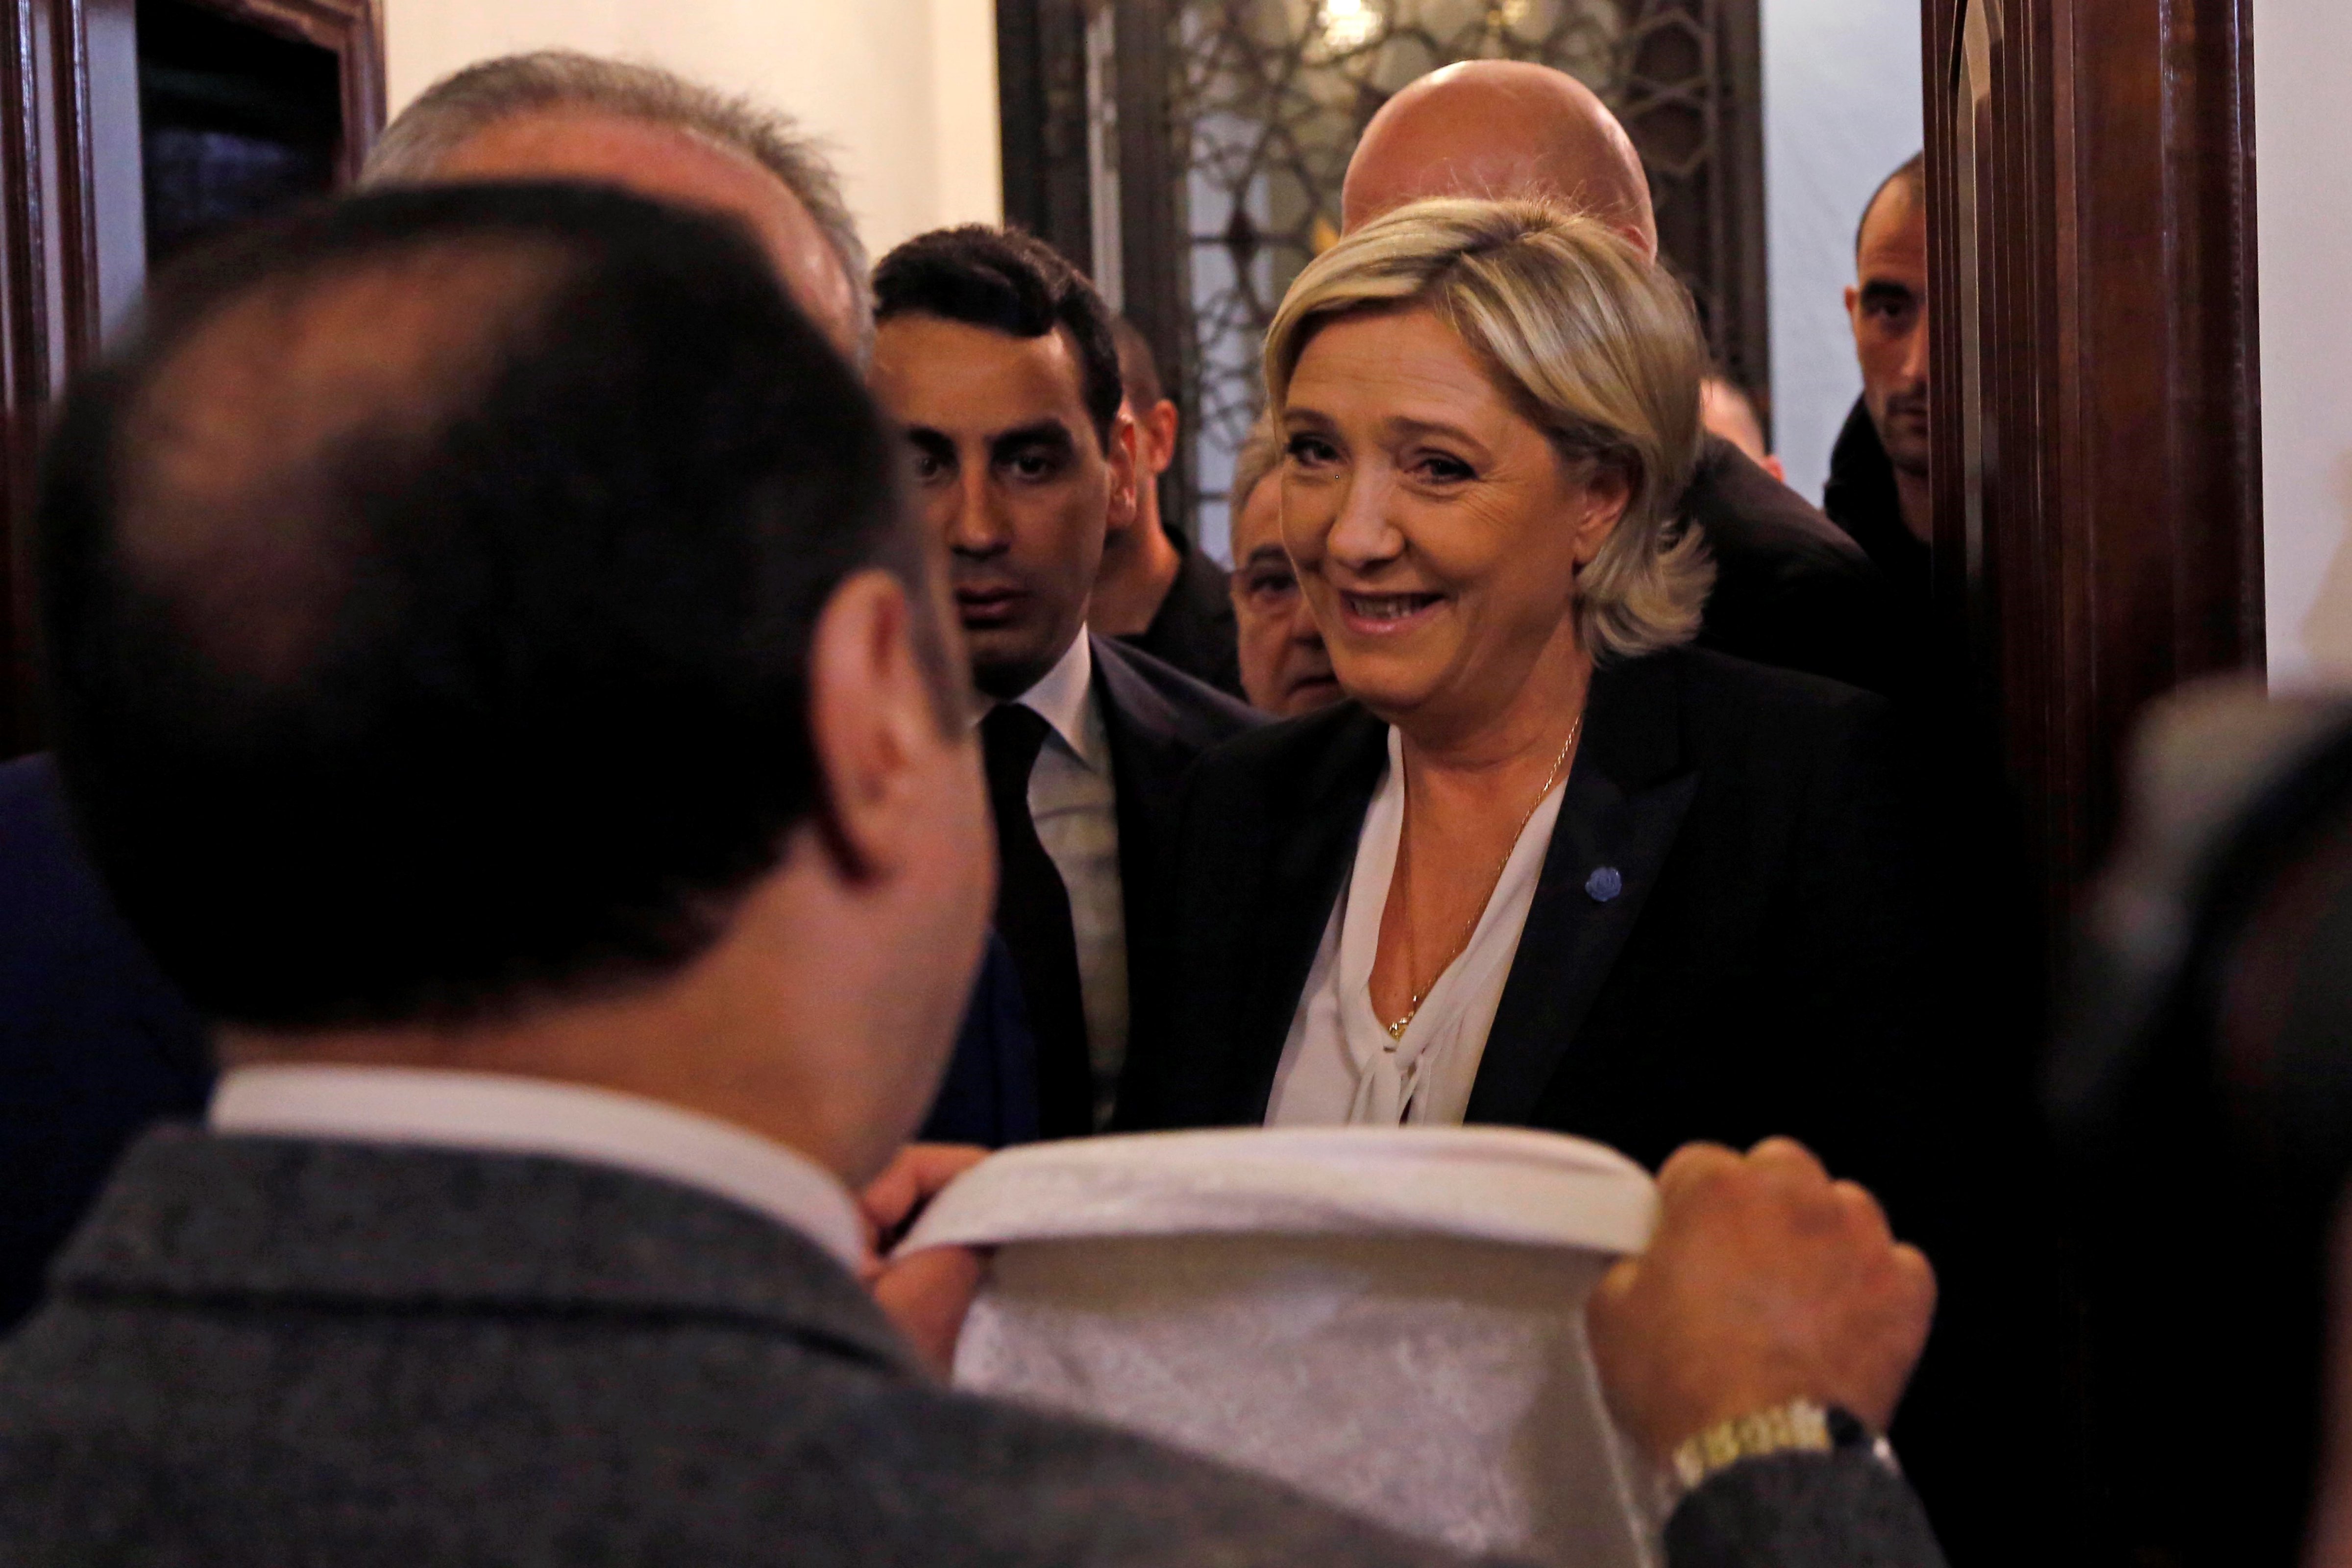 The leader of France's far-right Front National political party and presidential candidate, Marine Le Pen (C) refuses to wear headscarf before her meeting with Lebanon's Grand Mufti Sheikh Abdul Latif Derian, in Beirut, Lebanon on February 21, 2017. (Ratib Al Safadi—Anadolu Agency/Getty Images)